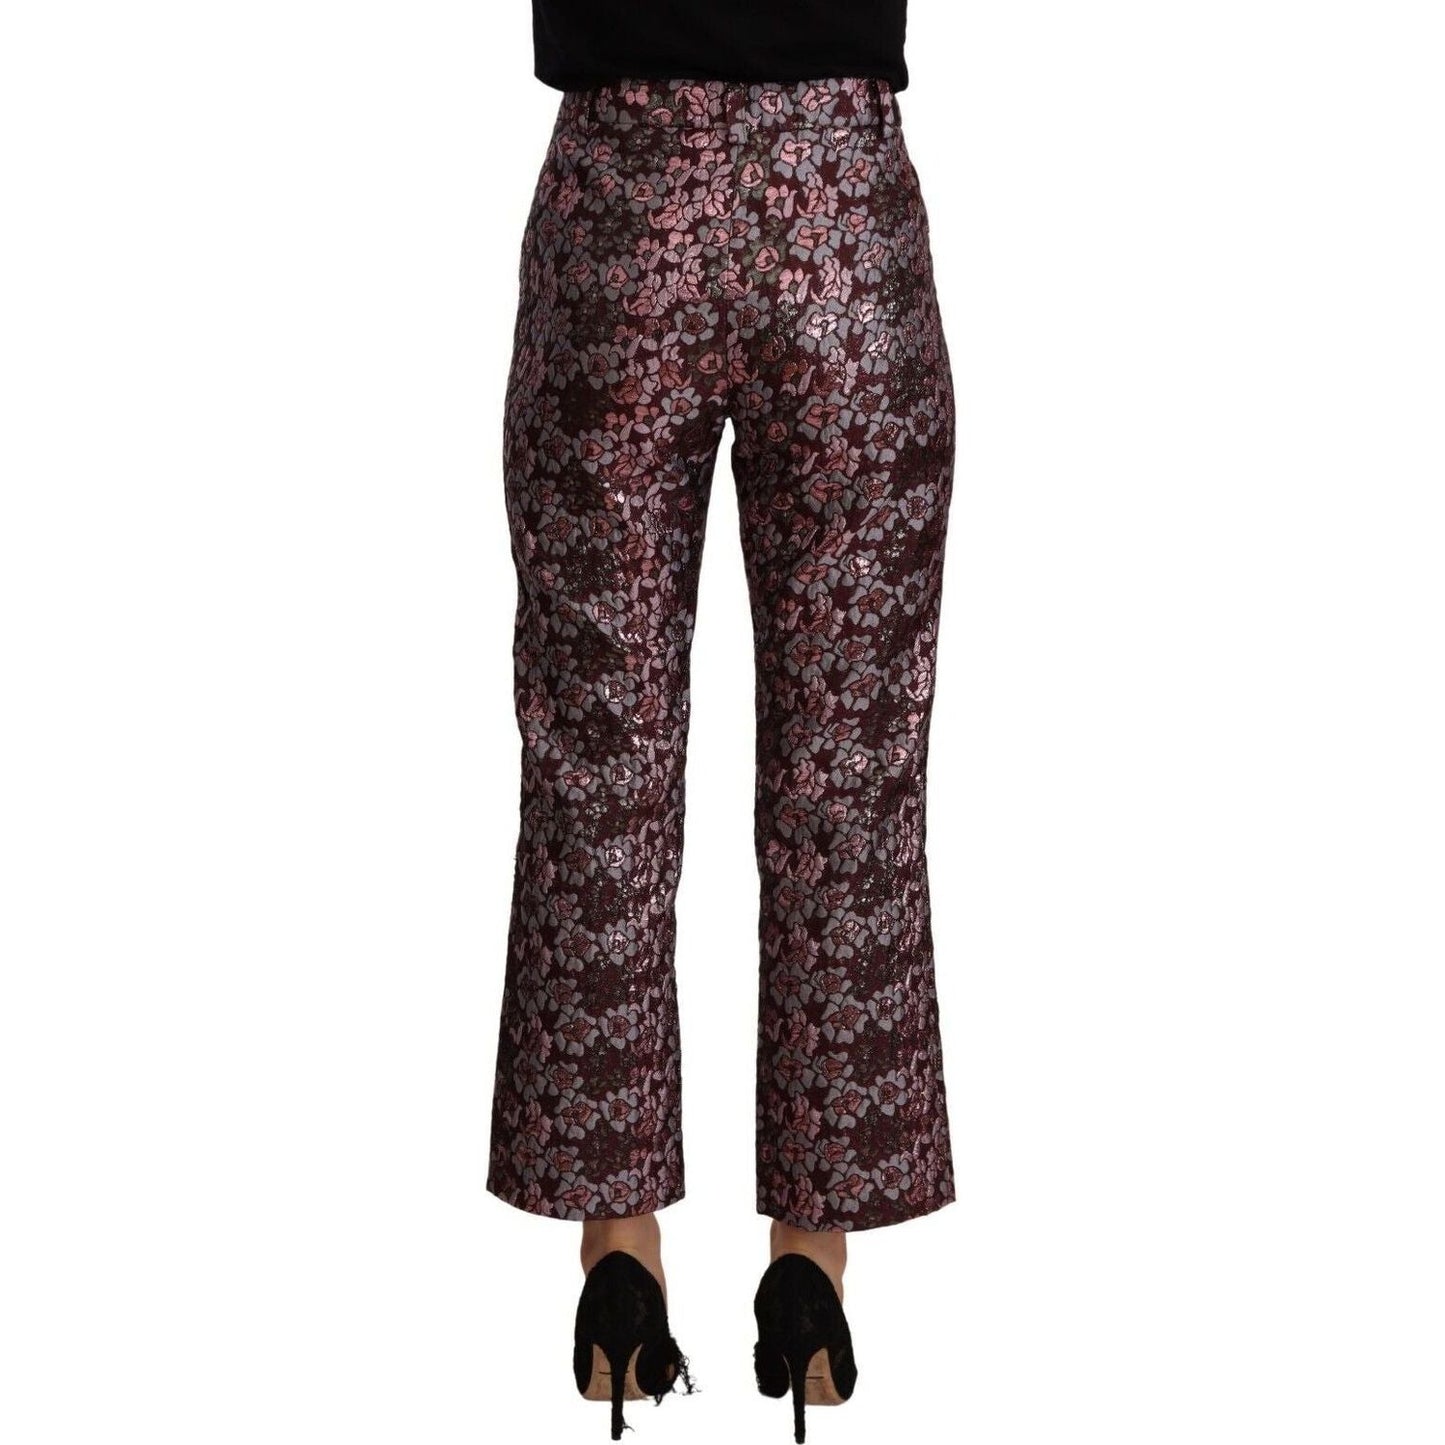 House of Holland High Waist Jacquard Flared Cropped Trousers multicolor-floral-jacquard-flared-cropped-pants s-l1600-2-121-335cdcd4-585.jpg